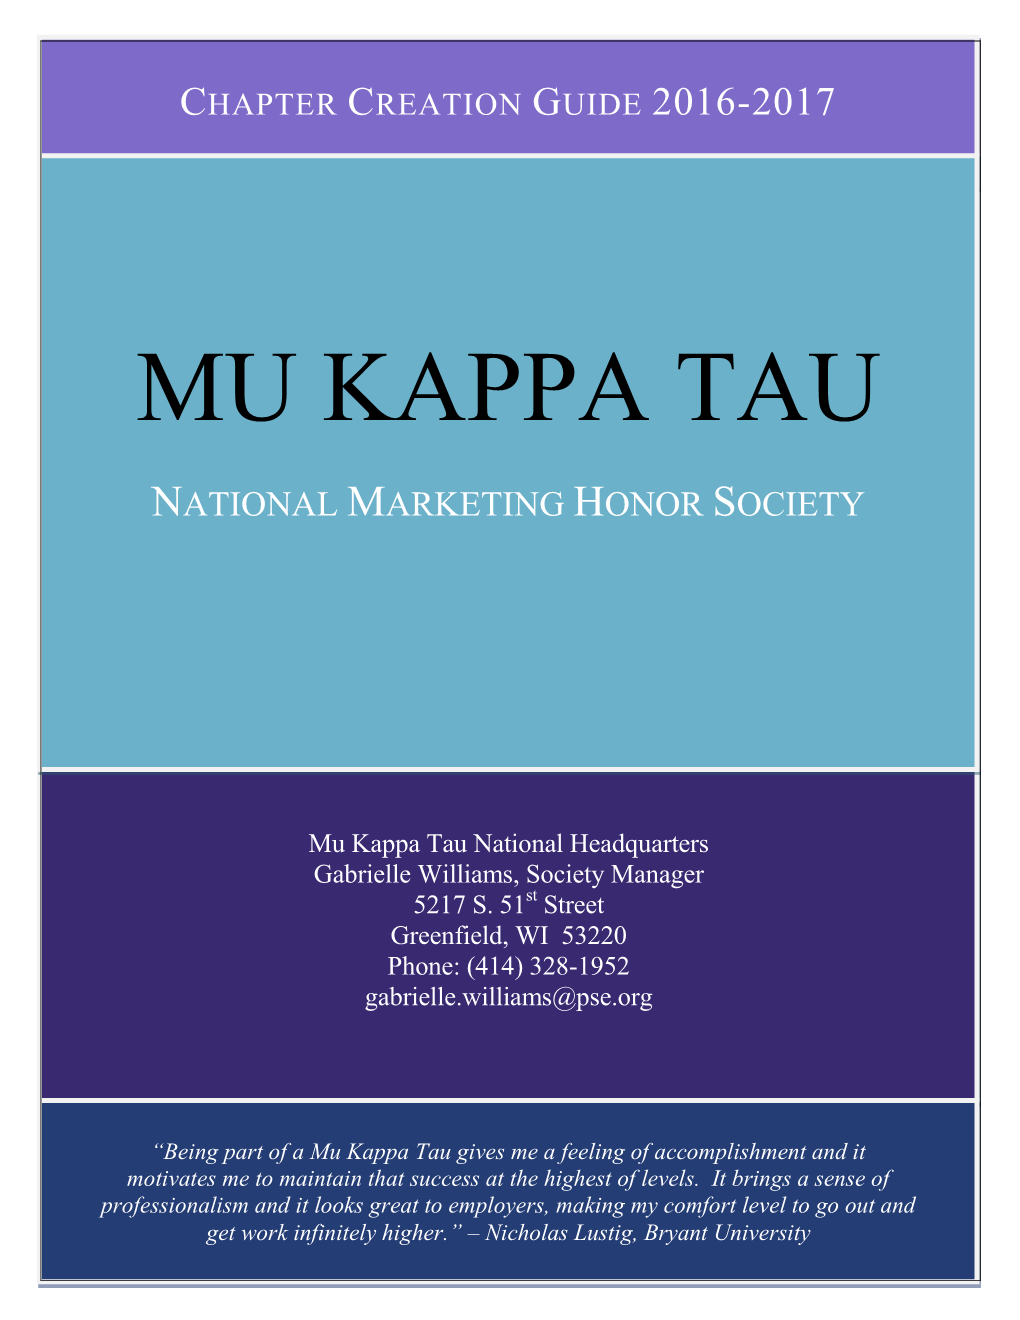 Purposes of Mu Kappa Tau, Will Be Committed to the Organization, and Will Uphold the Organization's Beliefs and Values